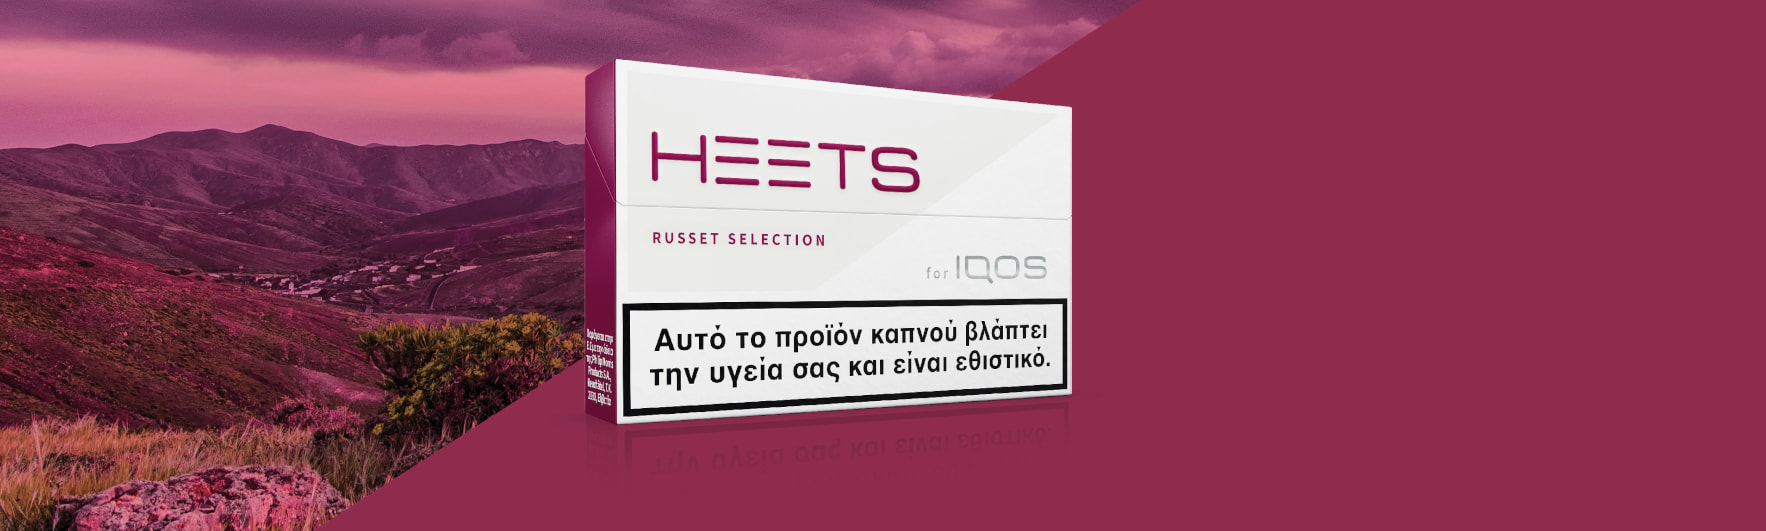 Discover the new HEETS Russet Selection